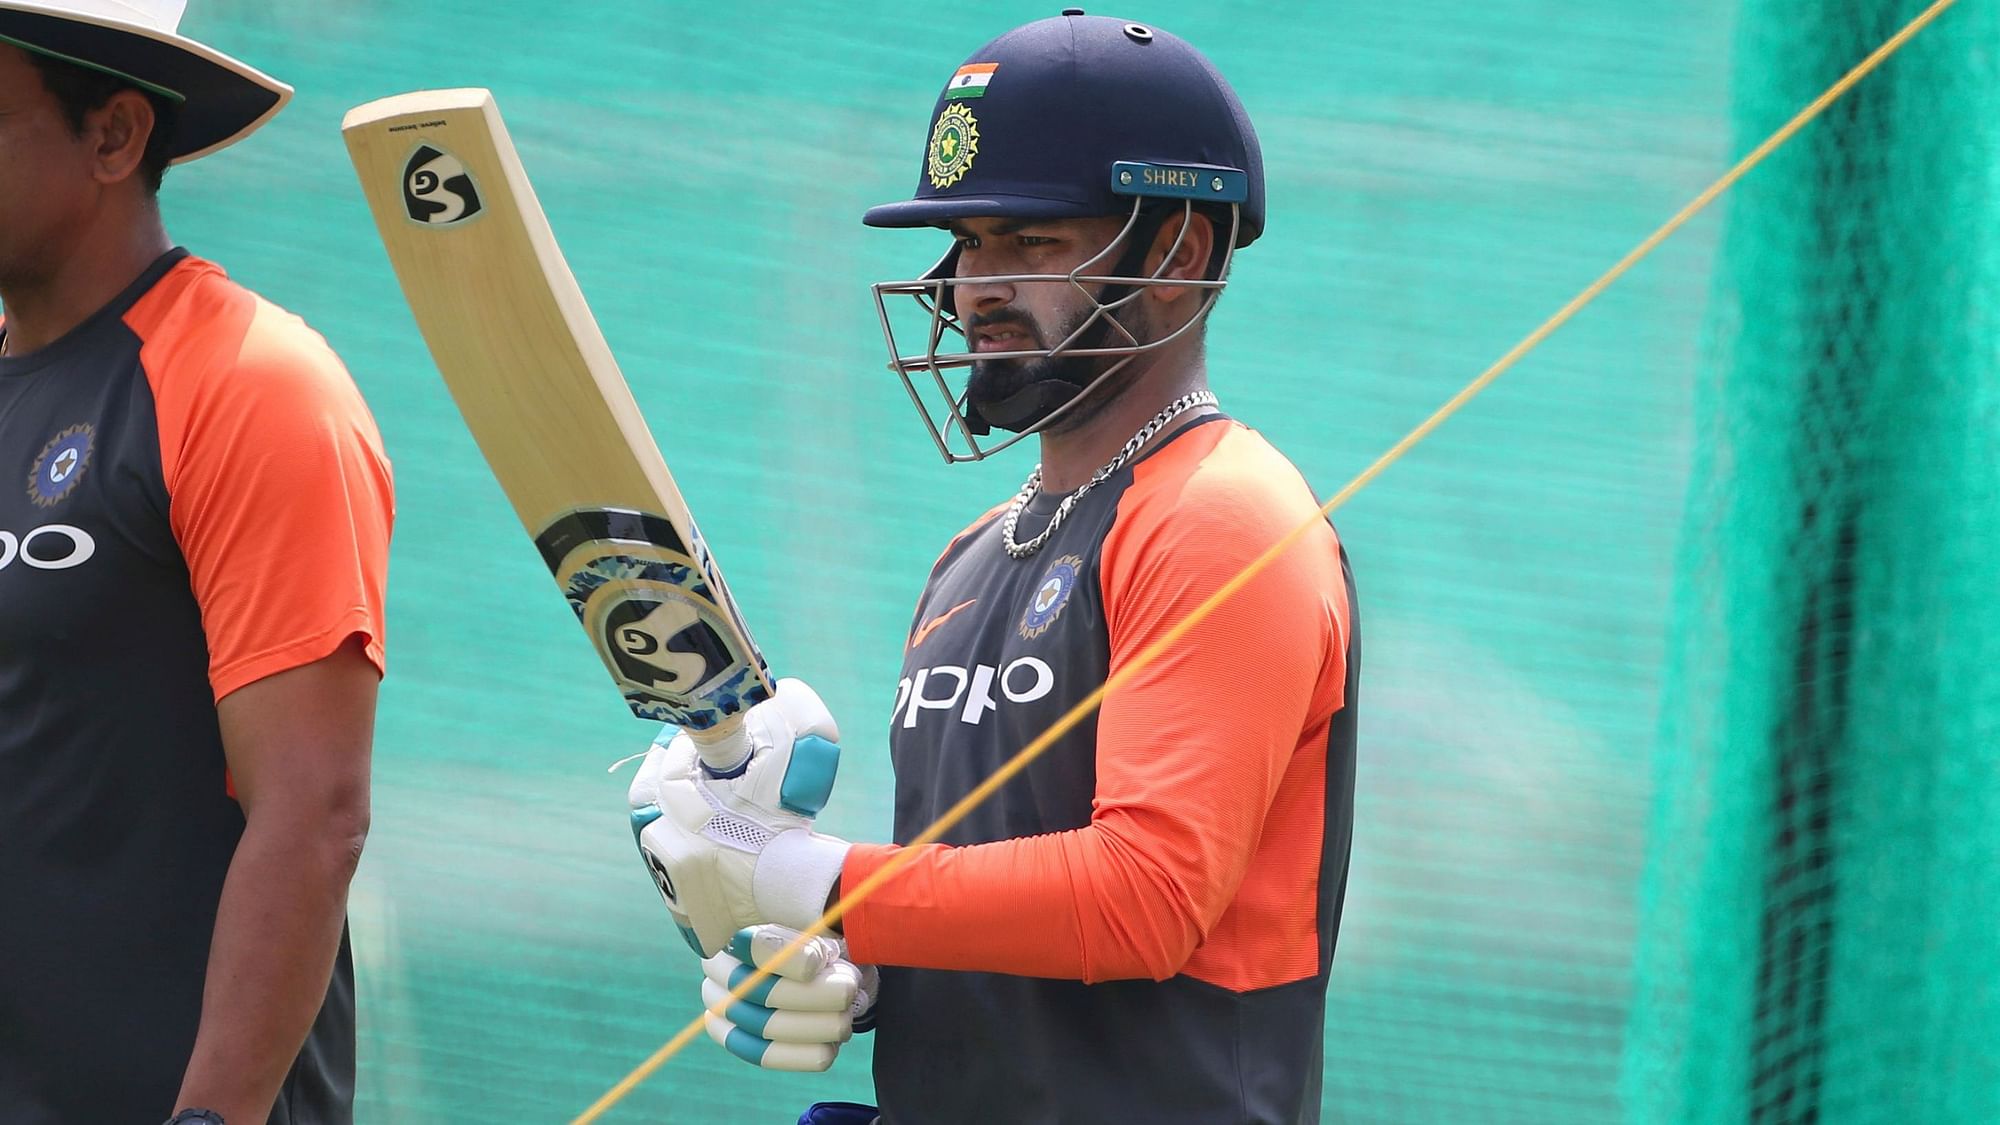 Rishabh Pant made his ODI debut for India during the home series against West Indies in October 2018.